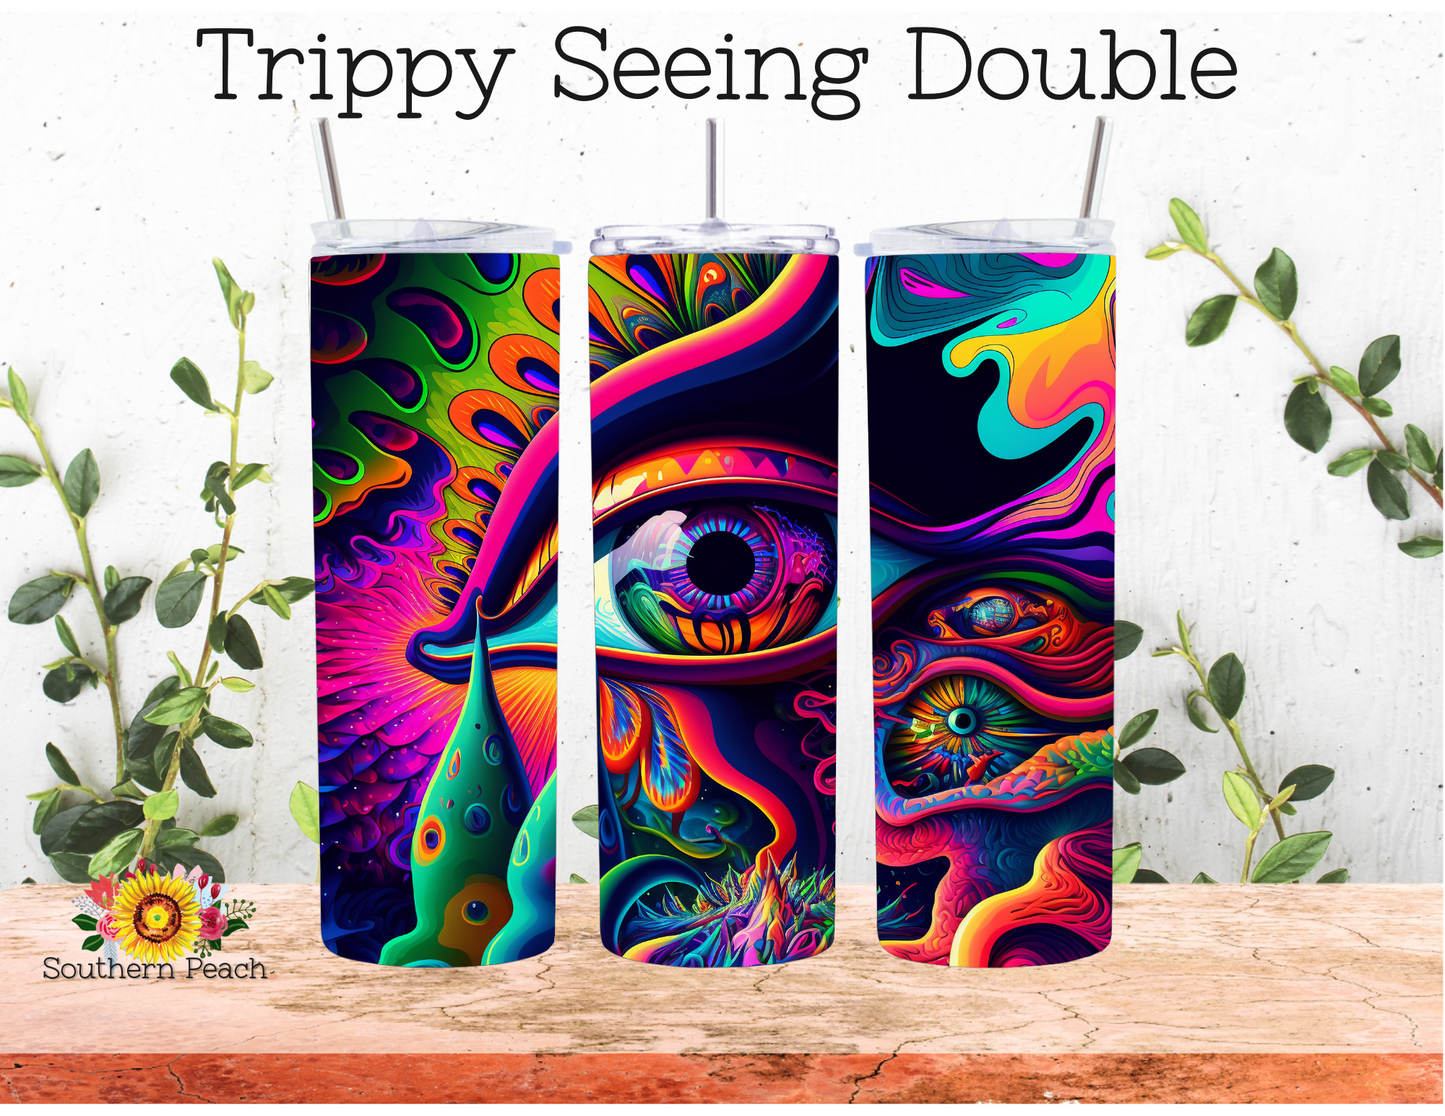 Trippy Seeing Double